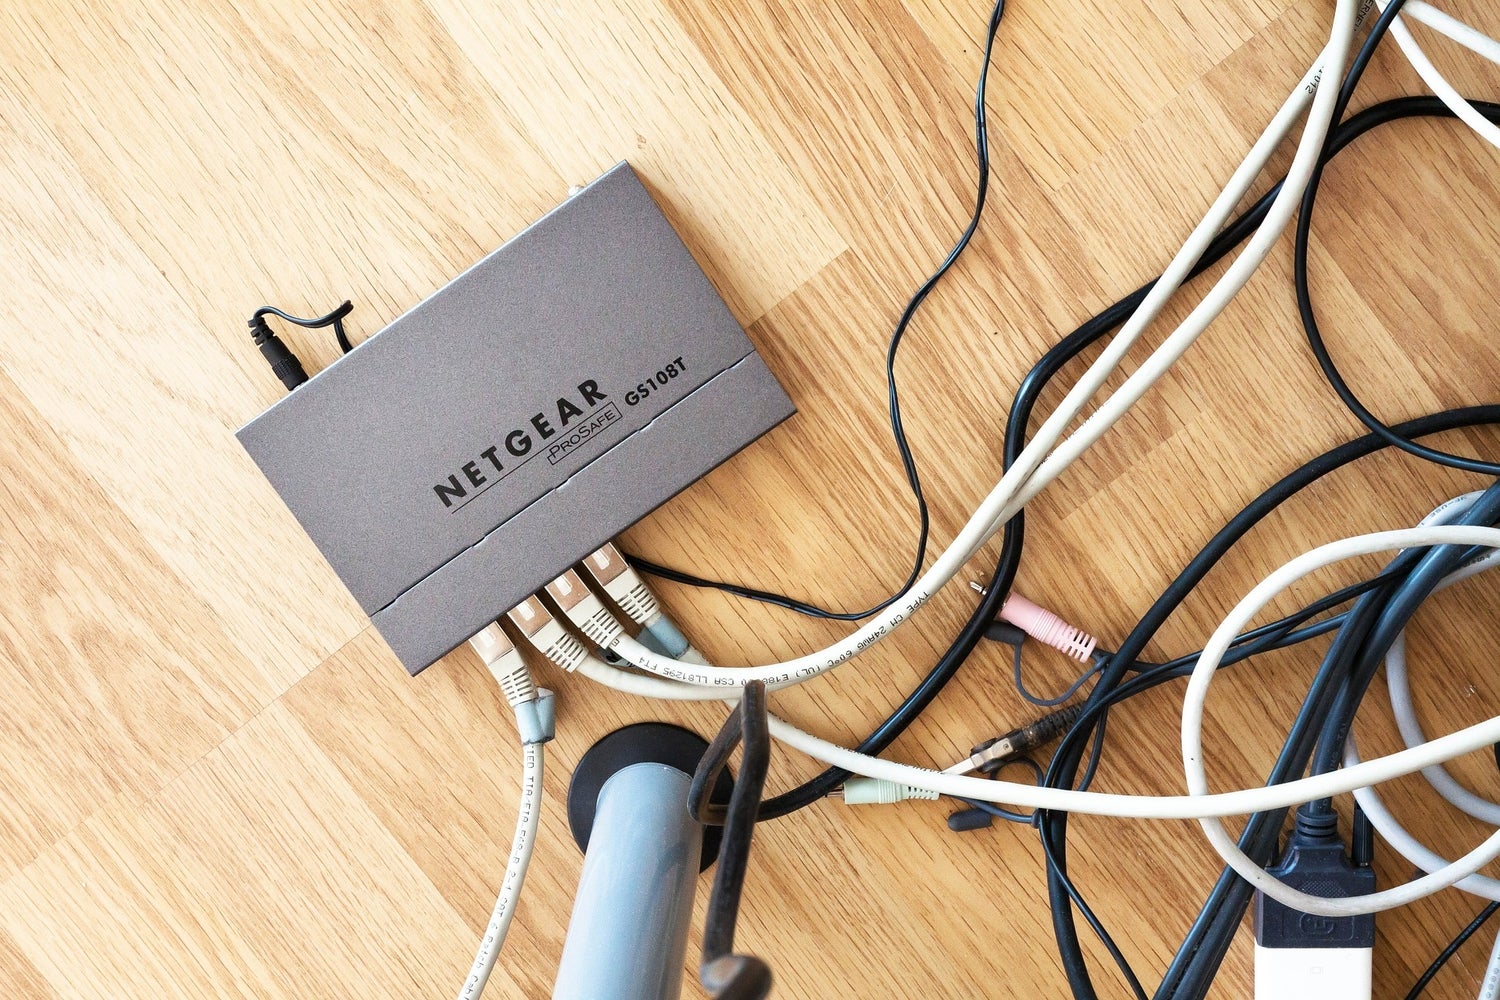 A Netgear router connected to a lot of cords, on a wood floor.